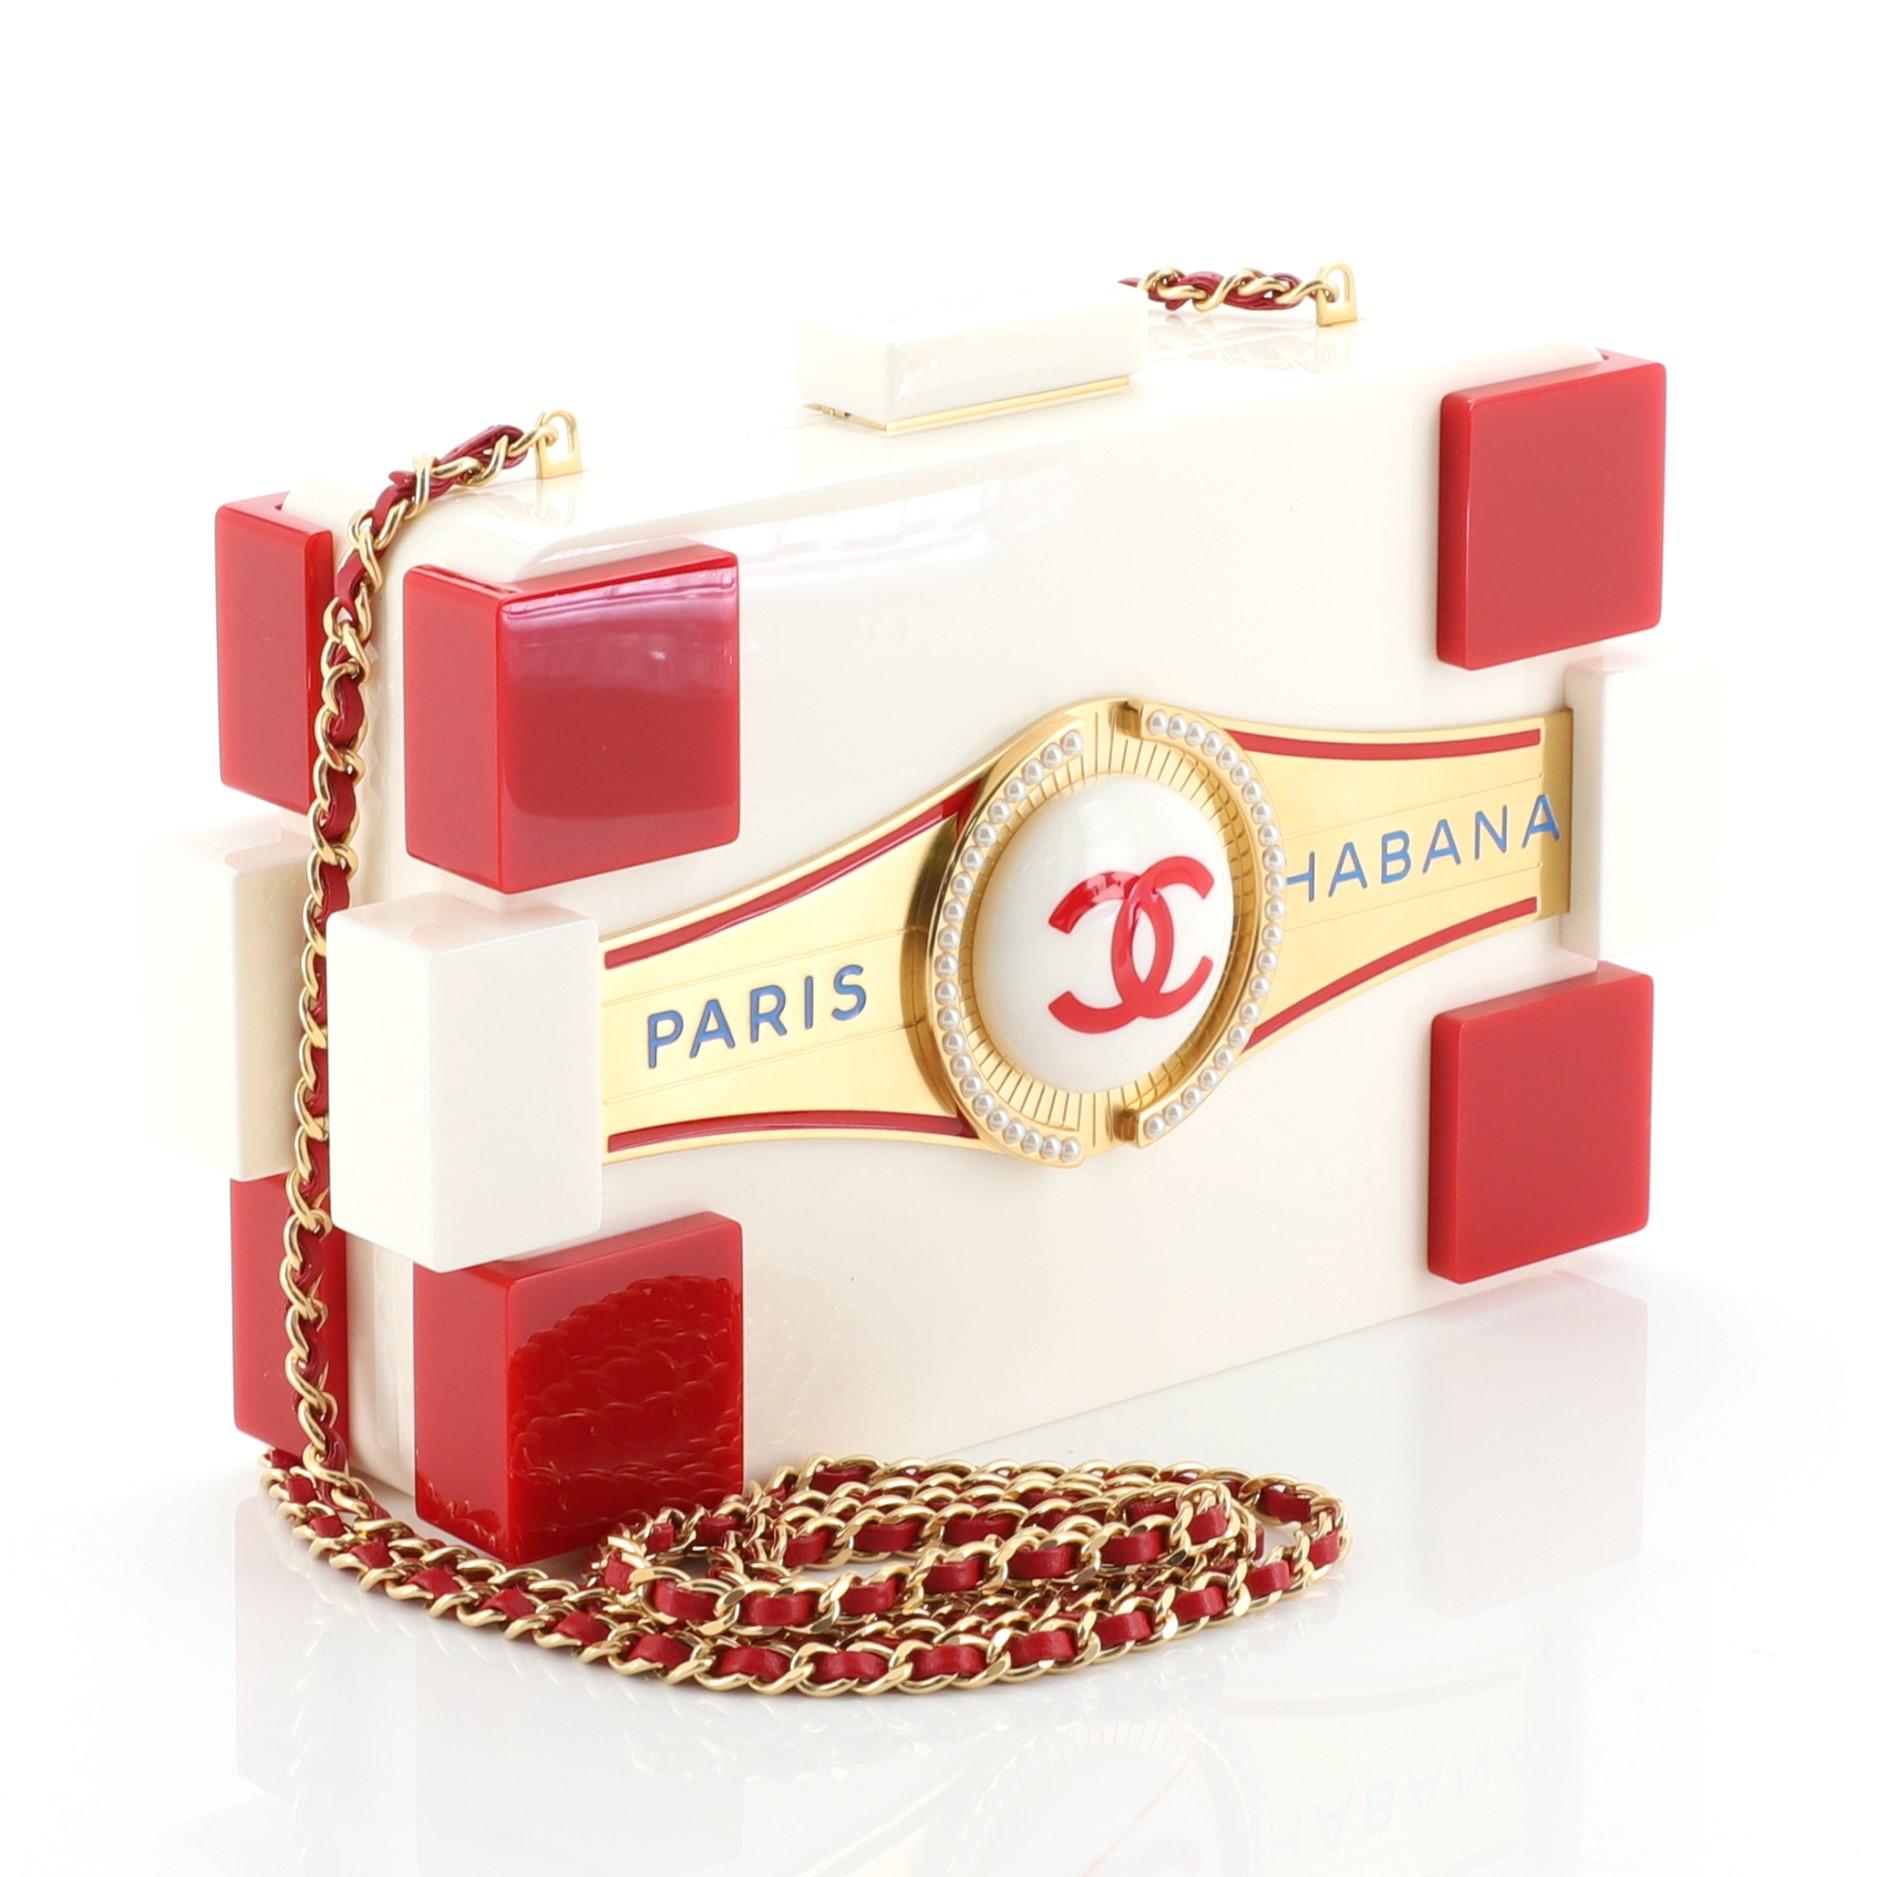 This Chanel Paris-Habana Lego Clutch Plexiglass, crafted from red and white plexiglass, features chain link strap, CC logo at the front, and matte gold tone hardware. It opens to a gold leather interior. Authenticity code reads: 23525249.

Estimated